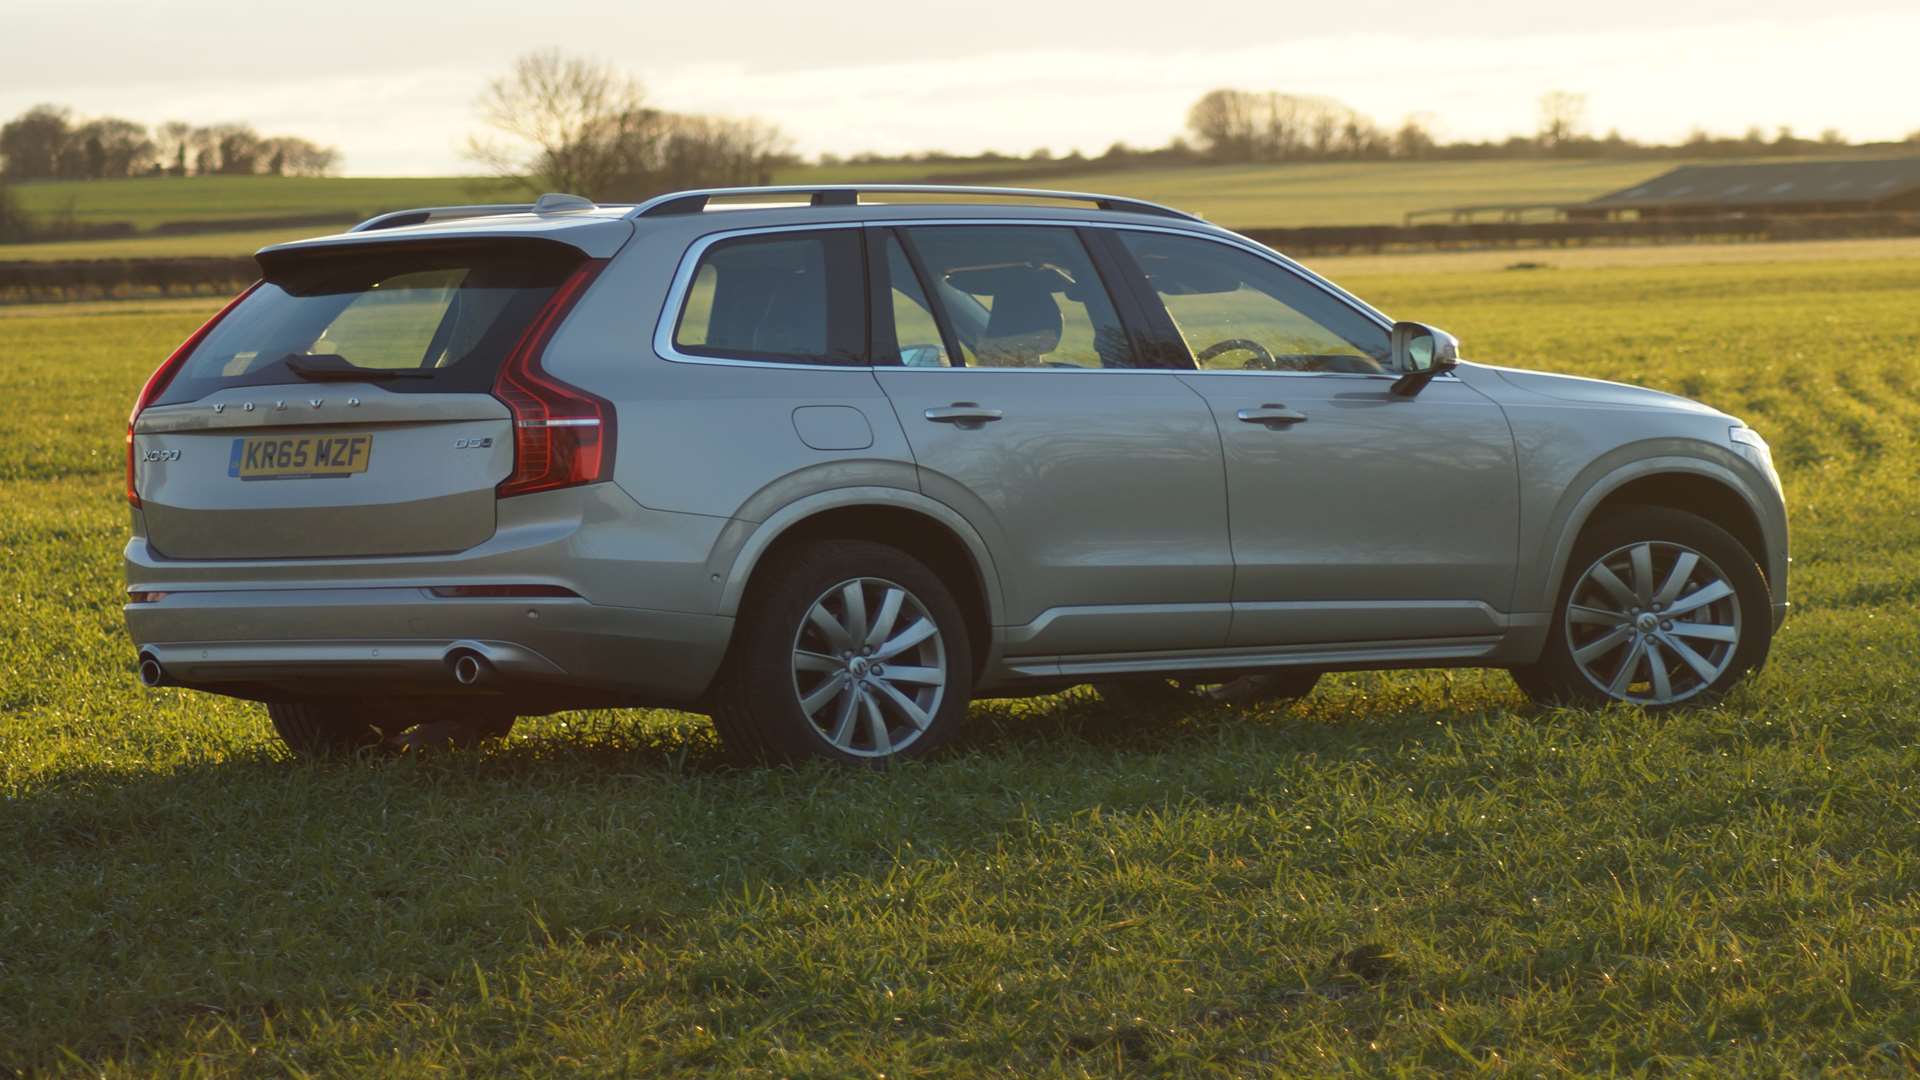 The XC90 is almost as at home tackling narrow country lanes as it is on wide open highways